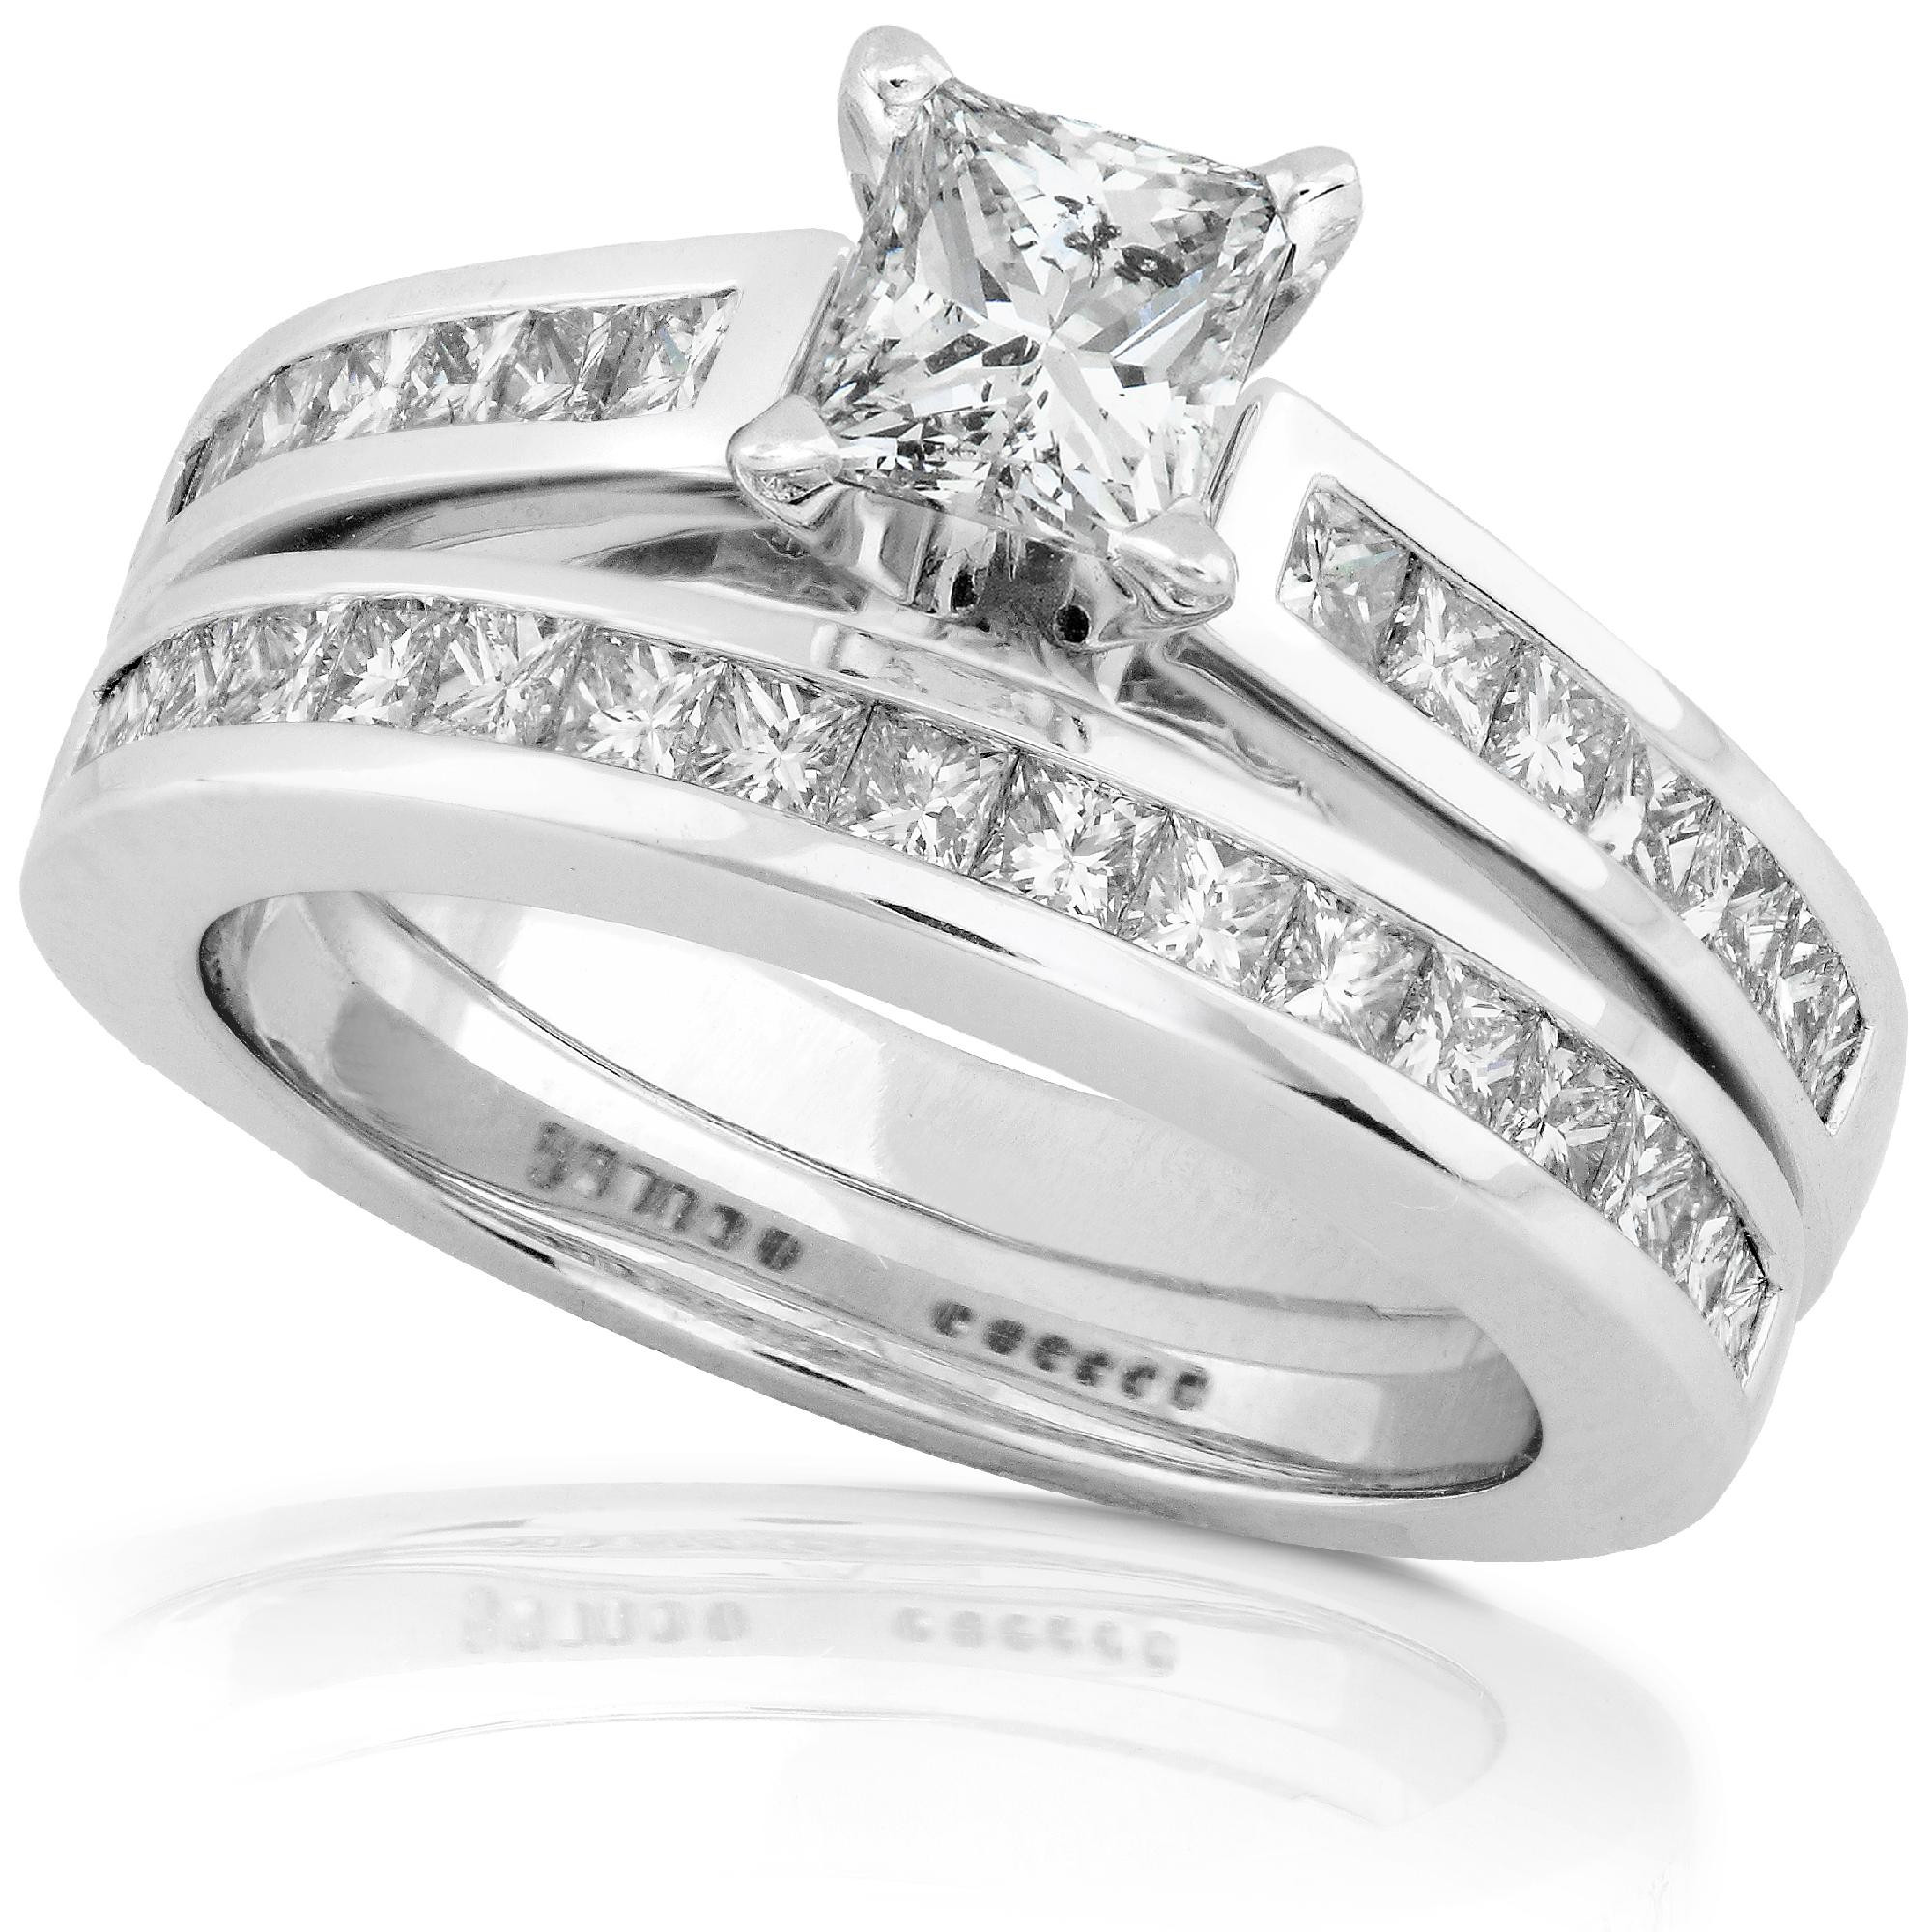 Used Wedding Ring Sets For Sale
 Engagement Rings Sale